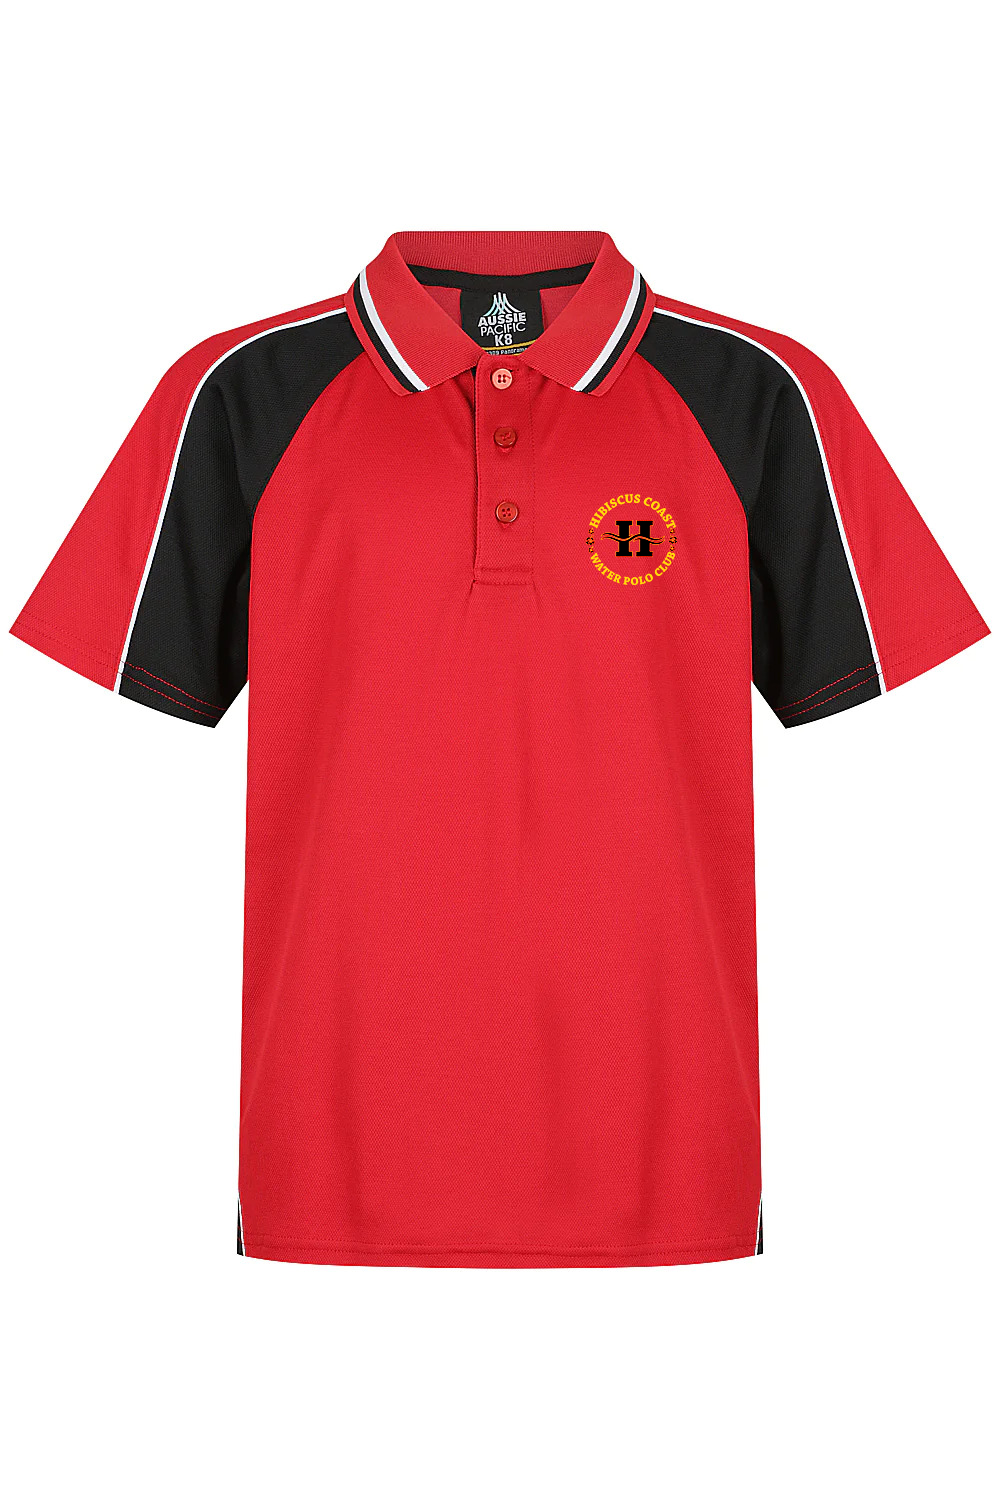 Hibiscus Coast Waterpolo Club AP Panorama Polo Shirt - Childs/Youths